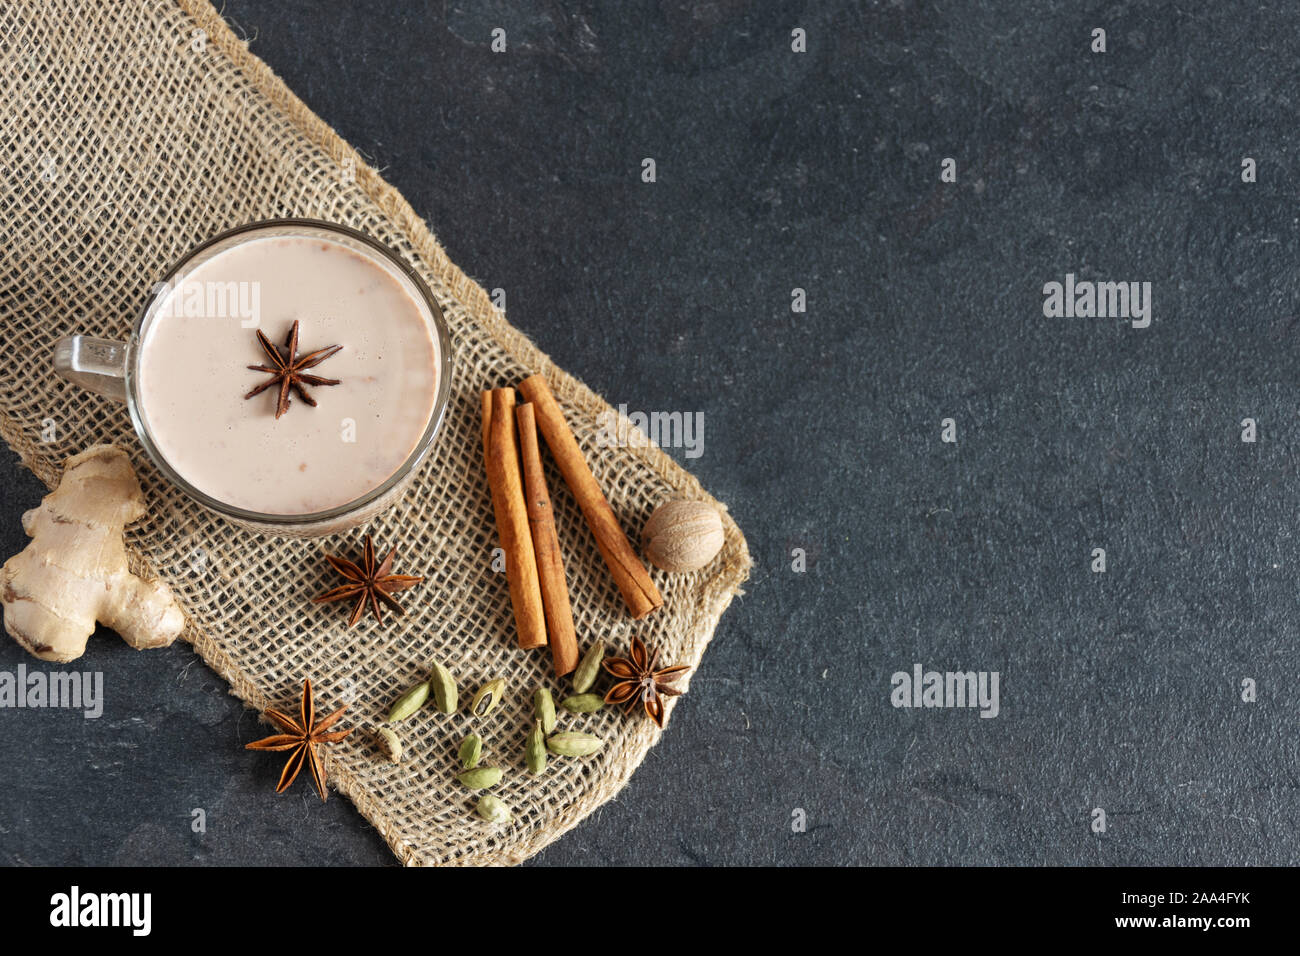 Masala chai made by brewing black tea with aromatic spices, such as Cinnamon Stick, Thai Cardamom, Ginger, Star Anise, Black Peppercorns, Nutmeg. Glas Stock Photo